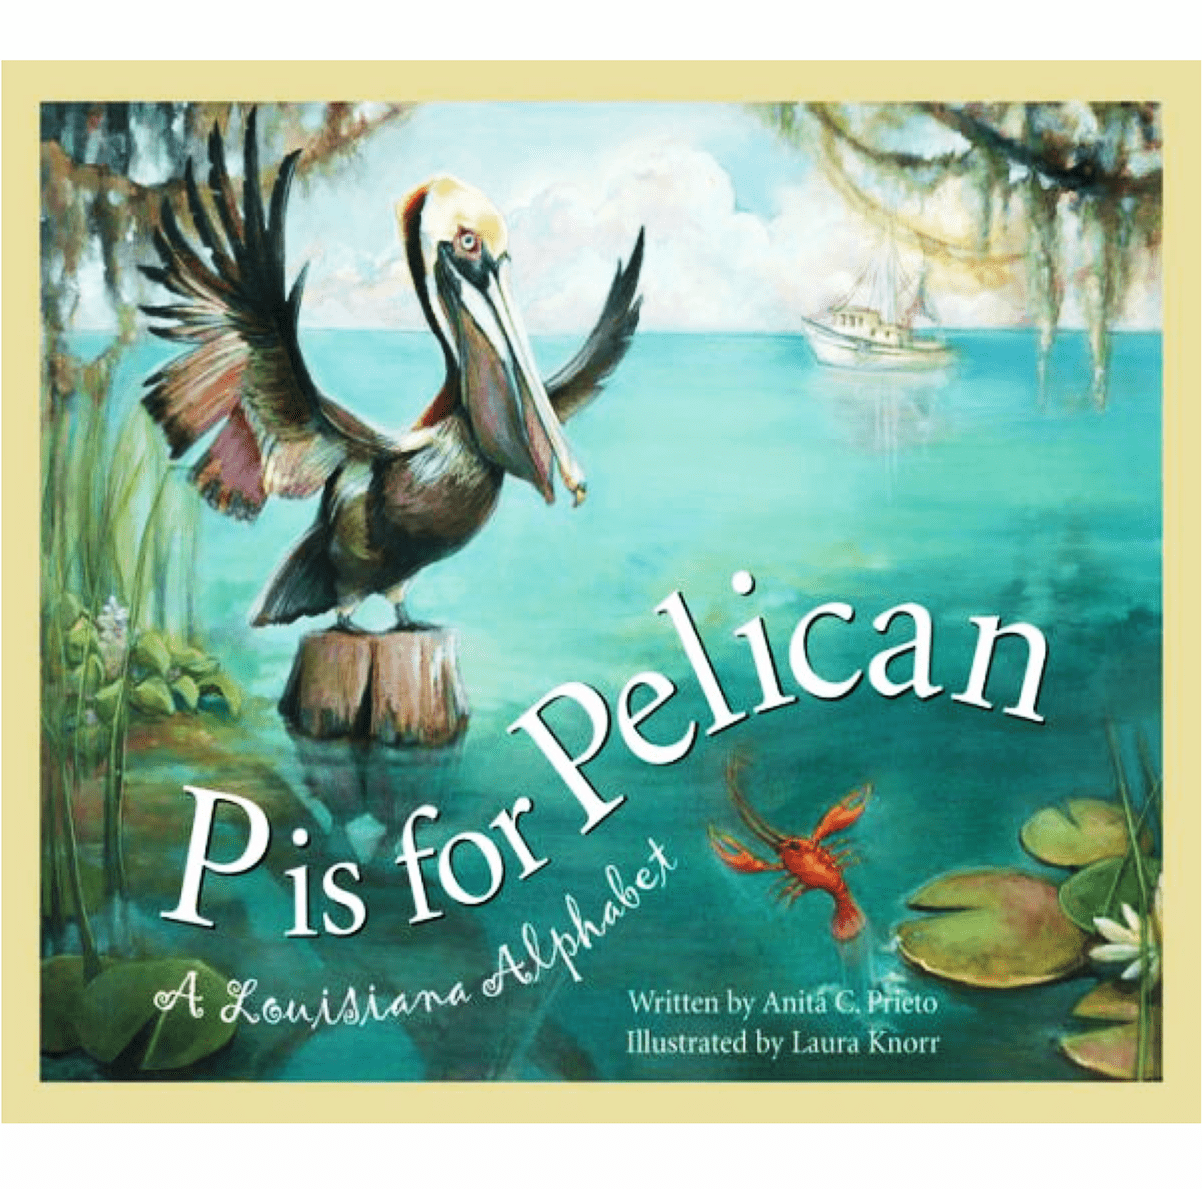 Looziana Book Company - P is for Pelican: A Louisiana Alphabet - Little Miss Muffin Children & Home